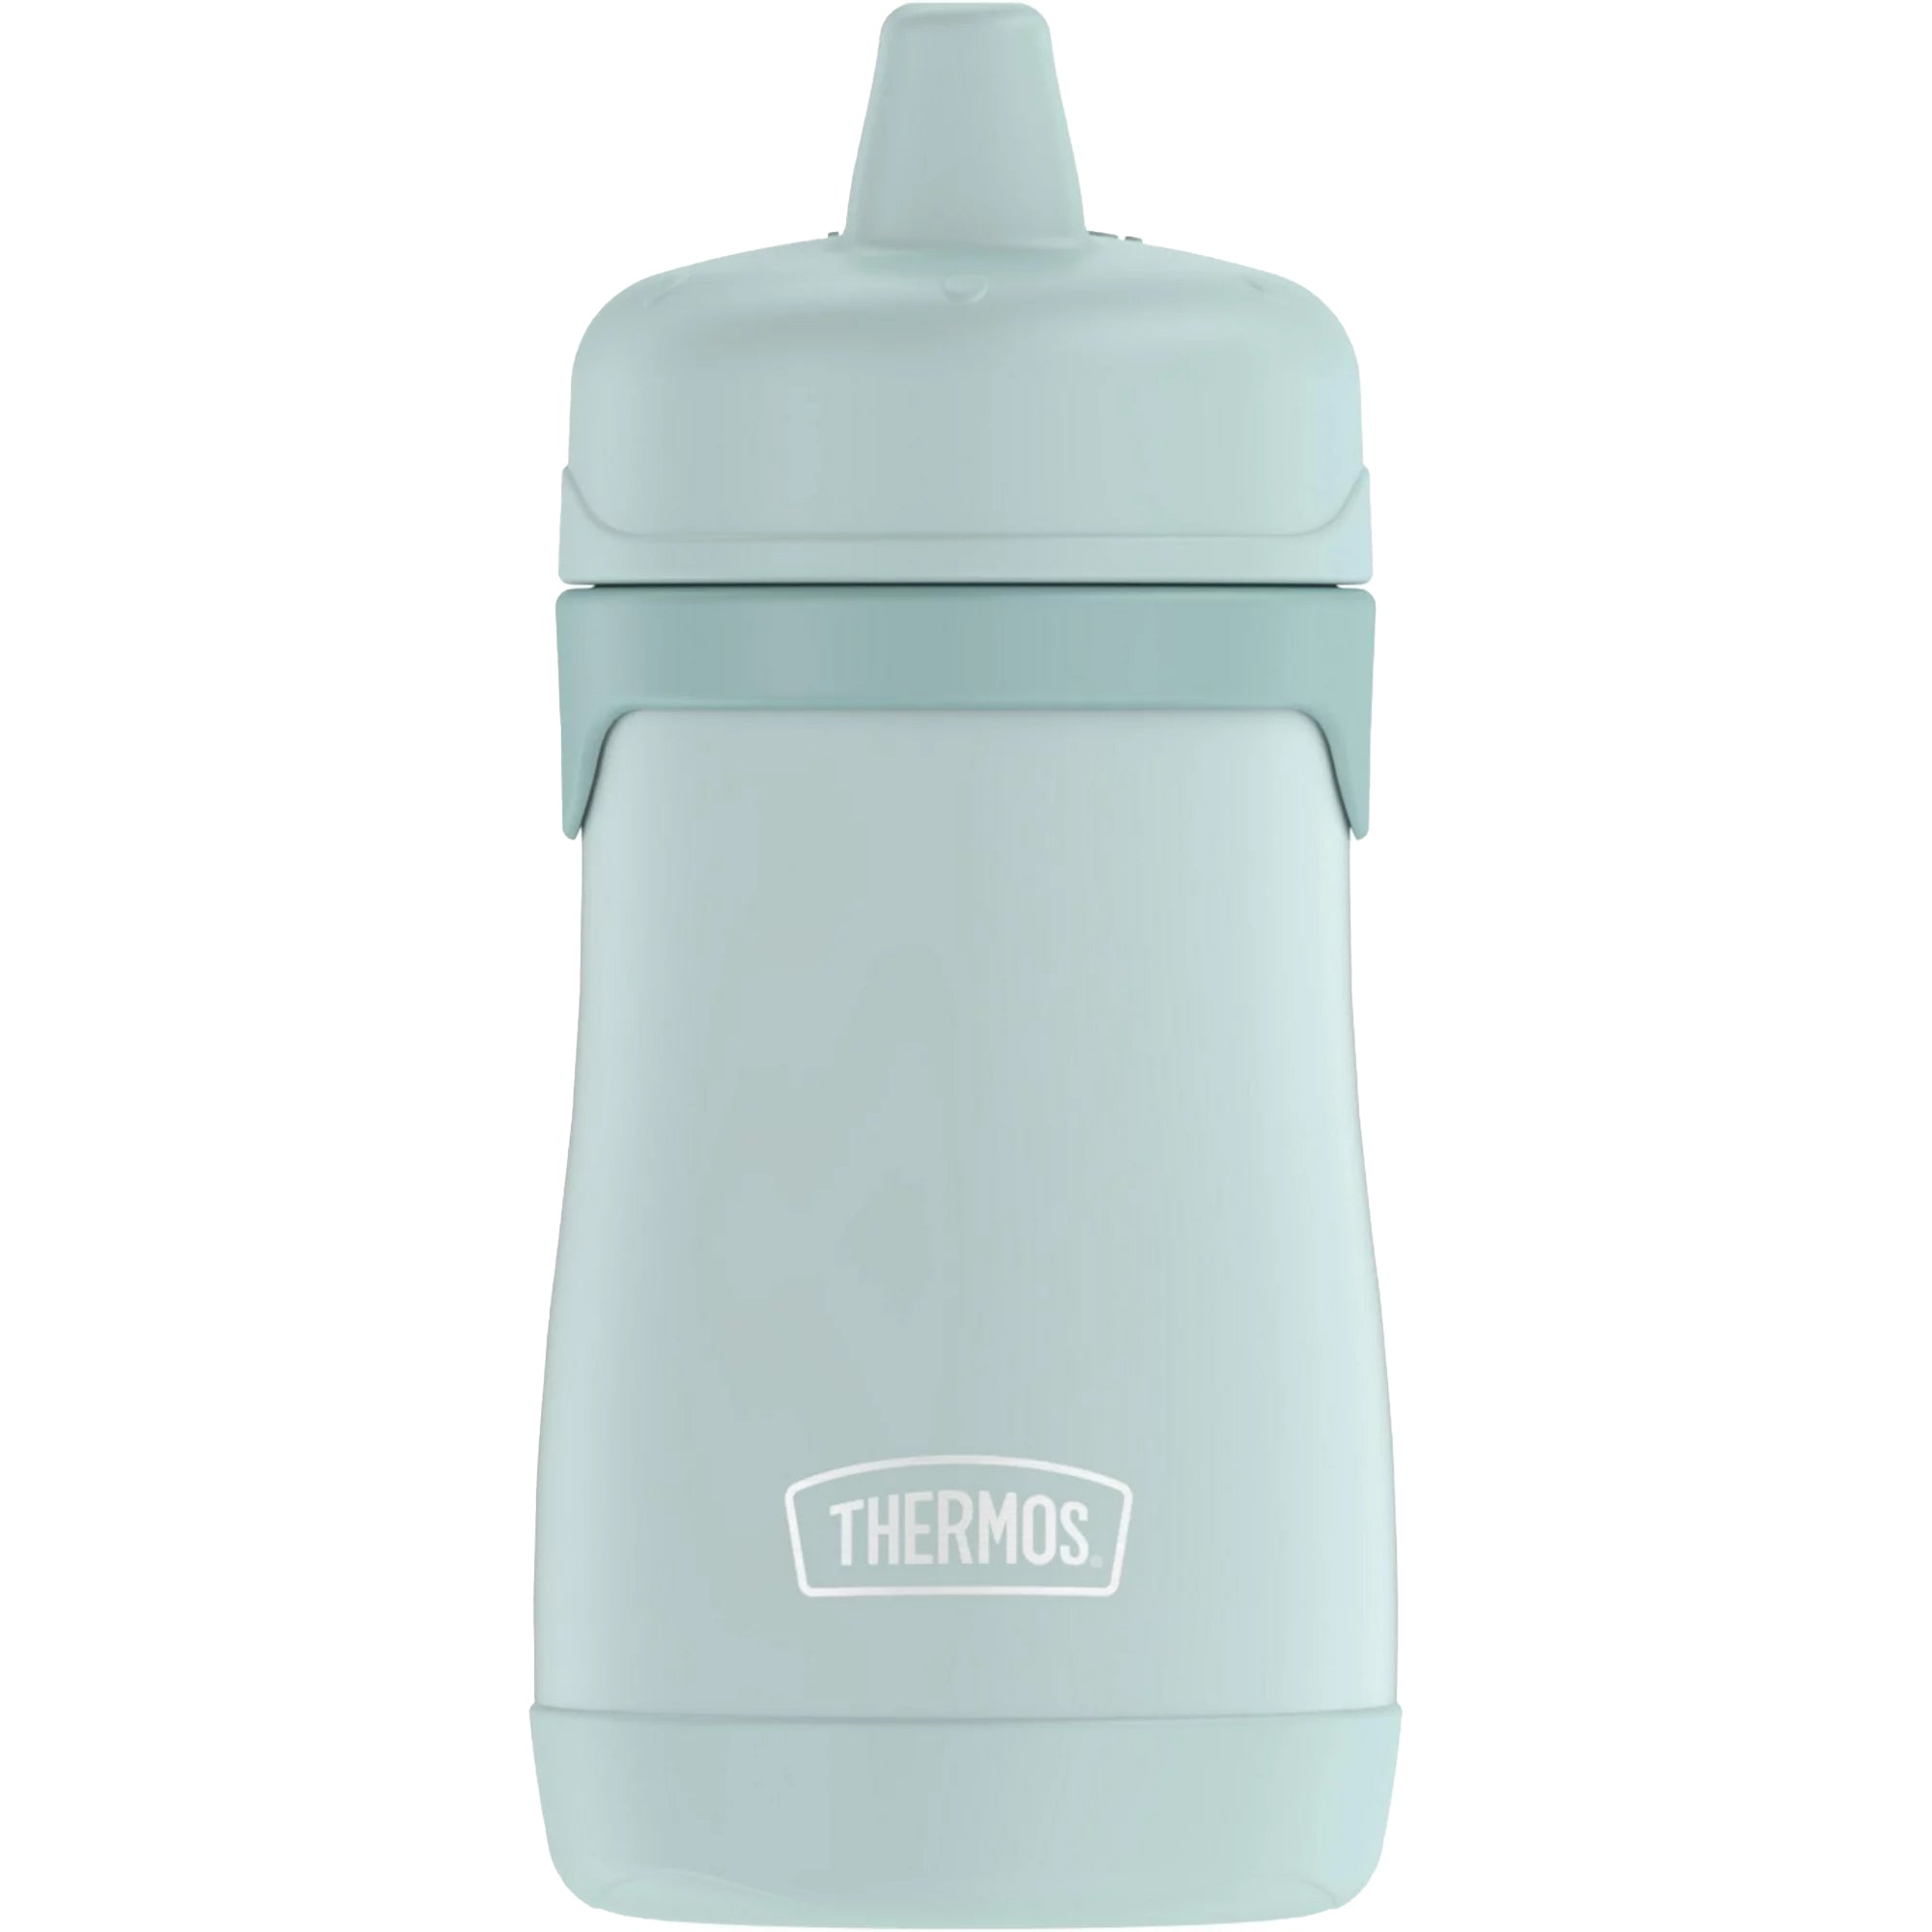 Thermos Baby 10 oz. Simple Pastels Insulated Stainless Steel Sippy Cup - Mint Thermos